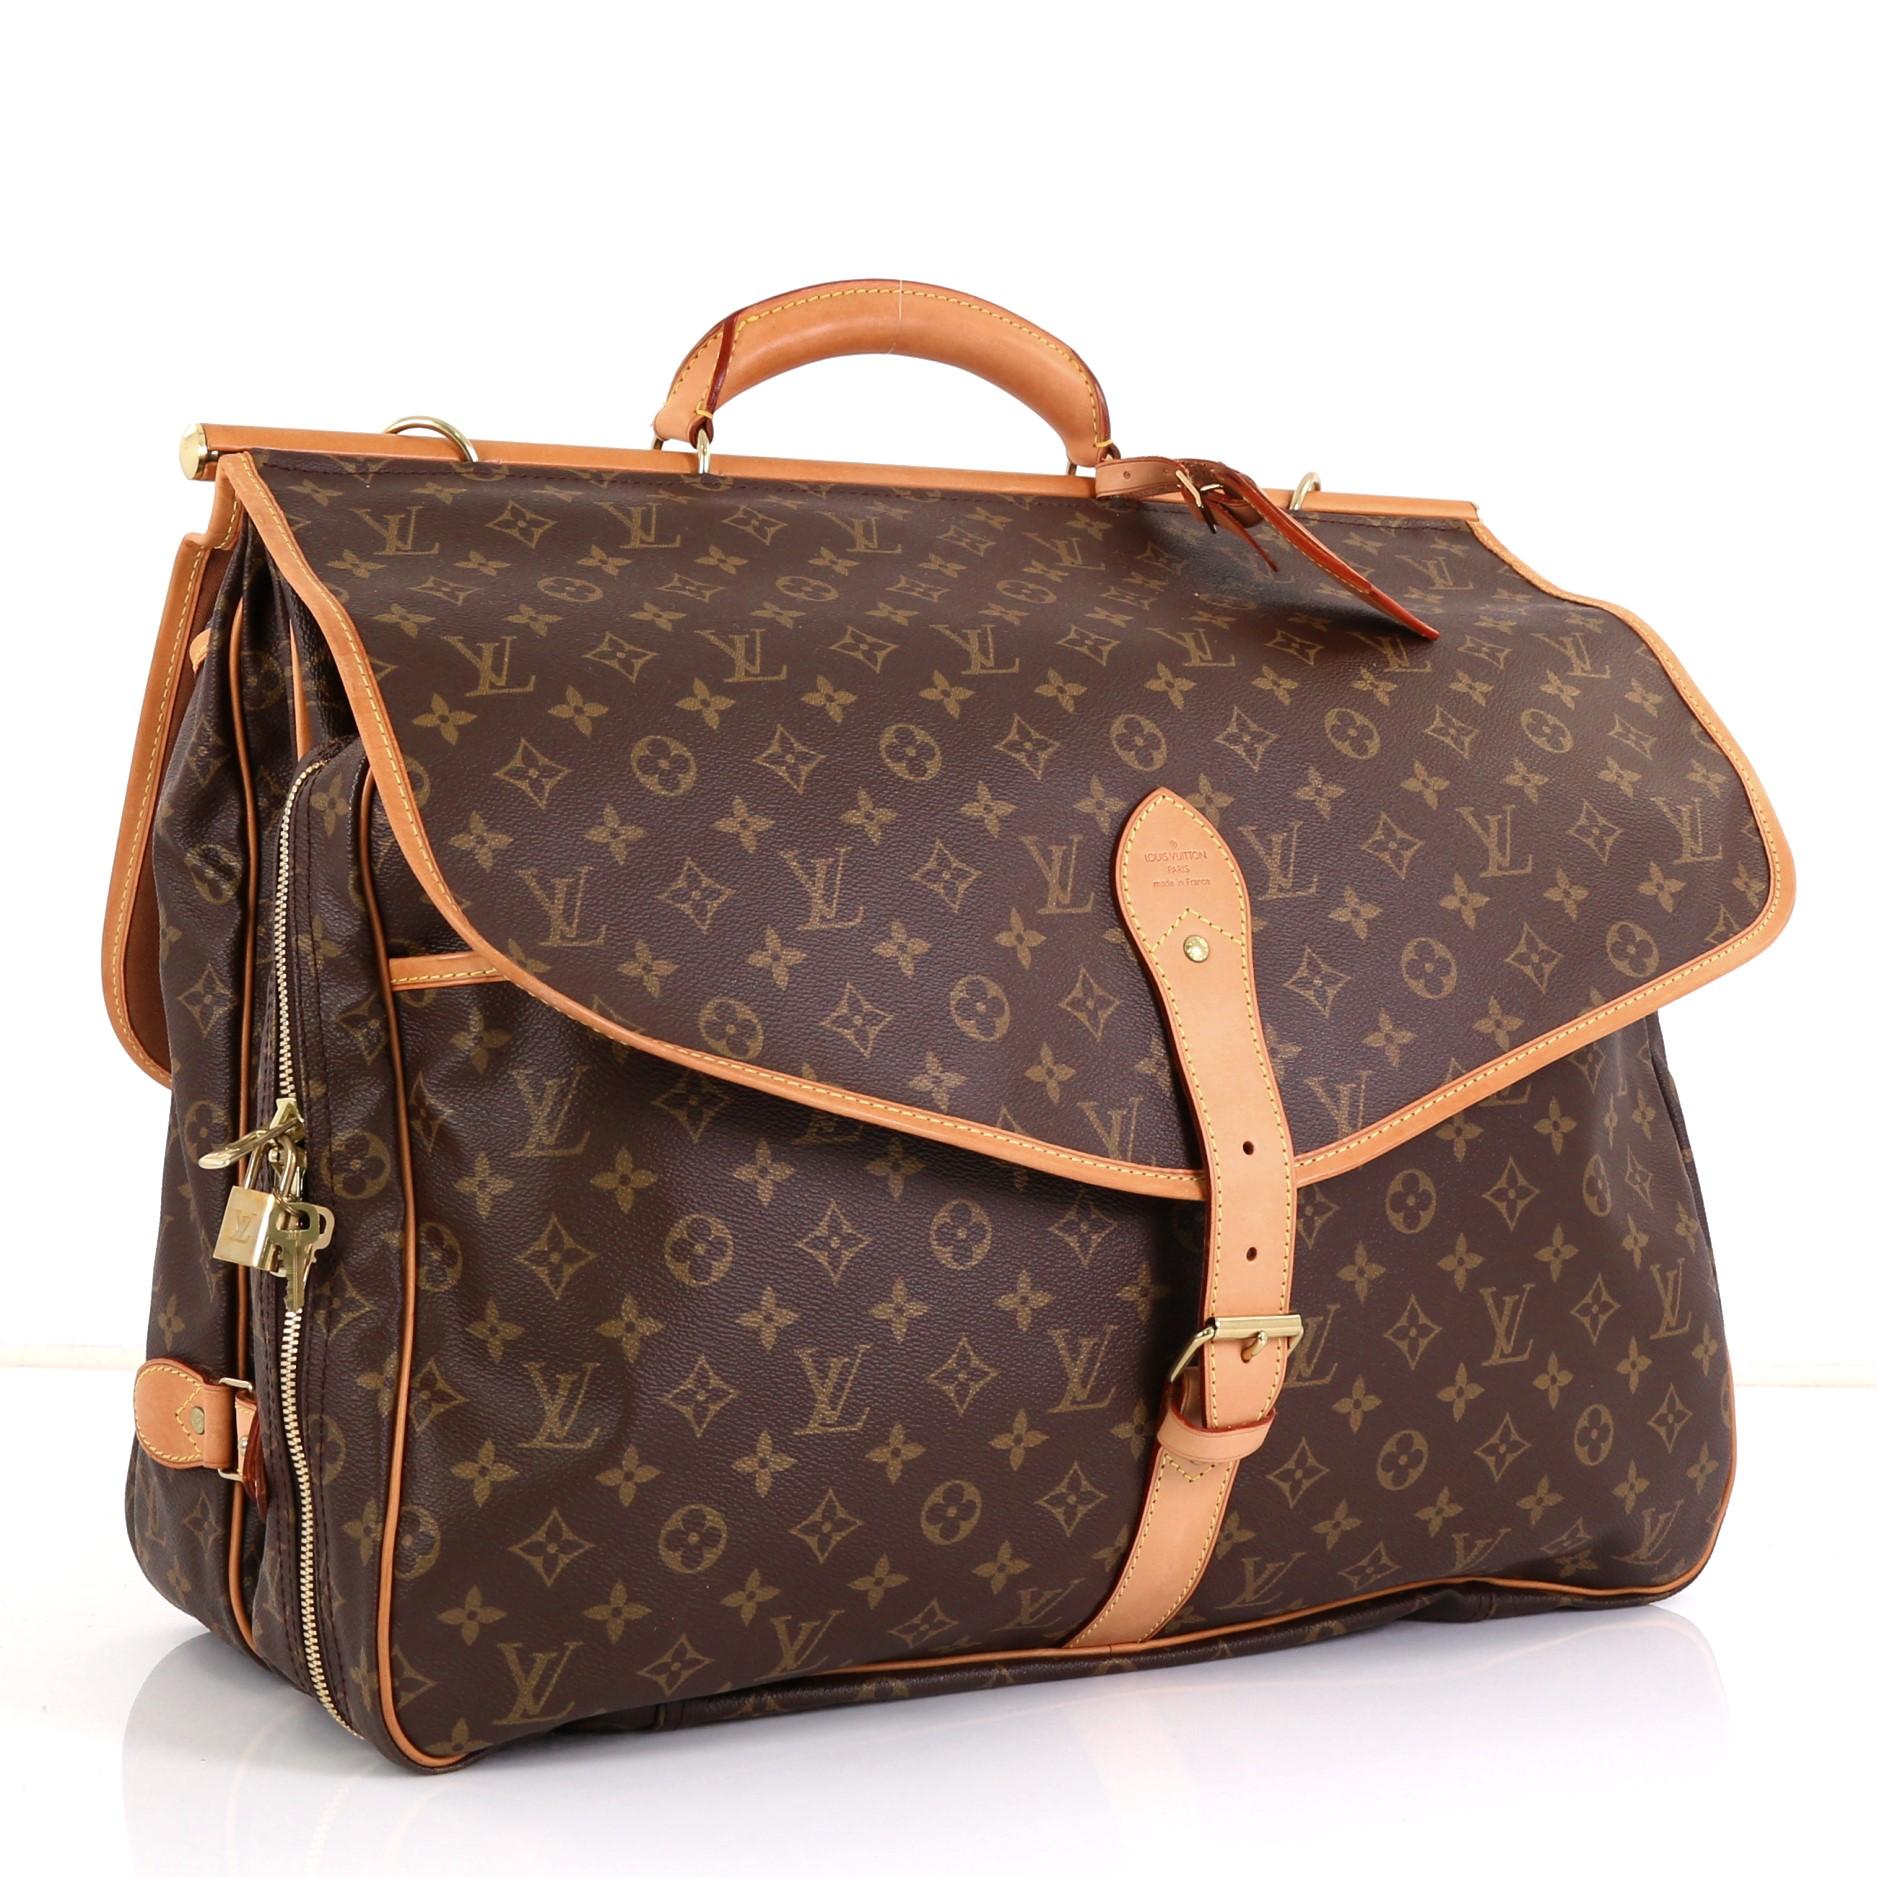 This Louis Vuitton Sac Chasse Hunting Bag Monogram Canvas, crafted in brown monogram coated canvas, features rolled leather top handle with vachetta rod, flat pockets under each flap, and gold-tone hardware. Its buckle and zip closures on both sides